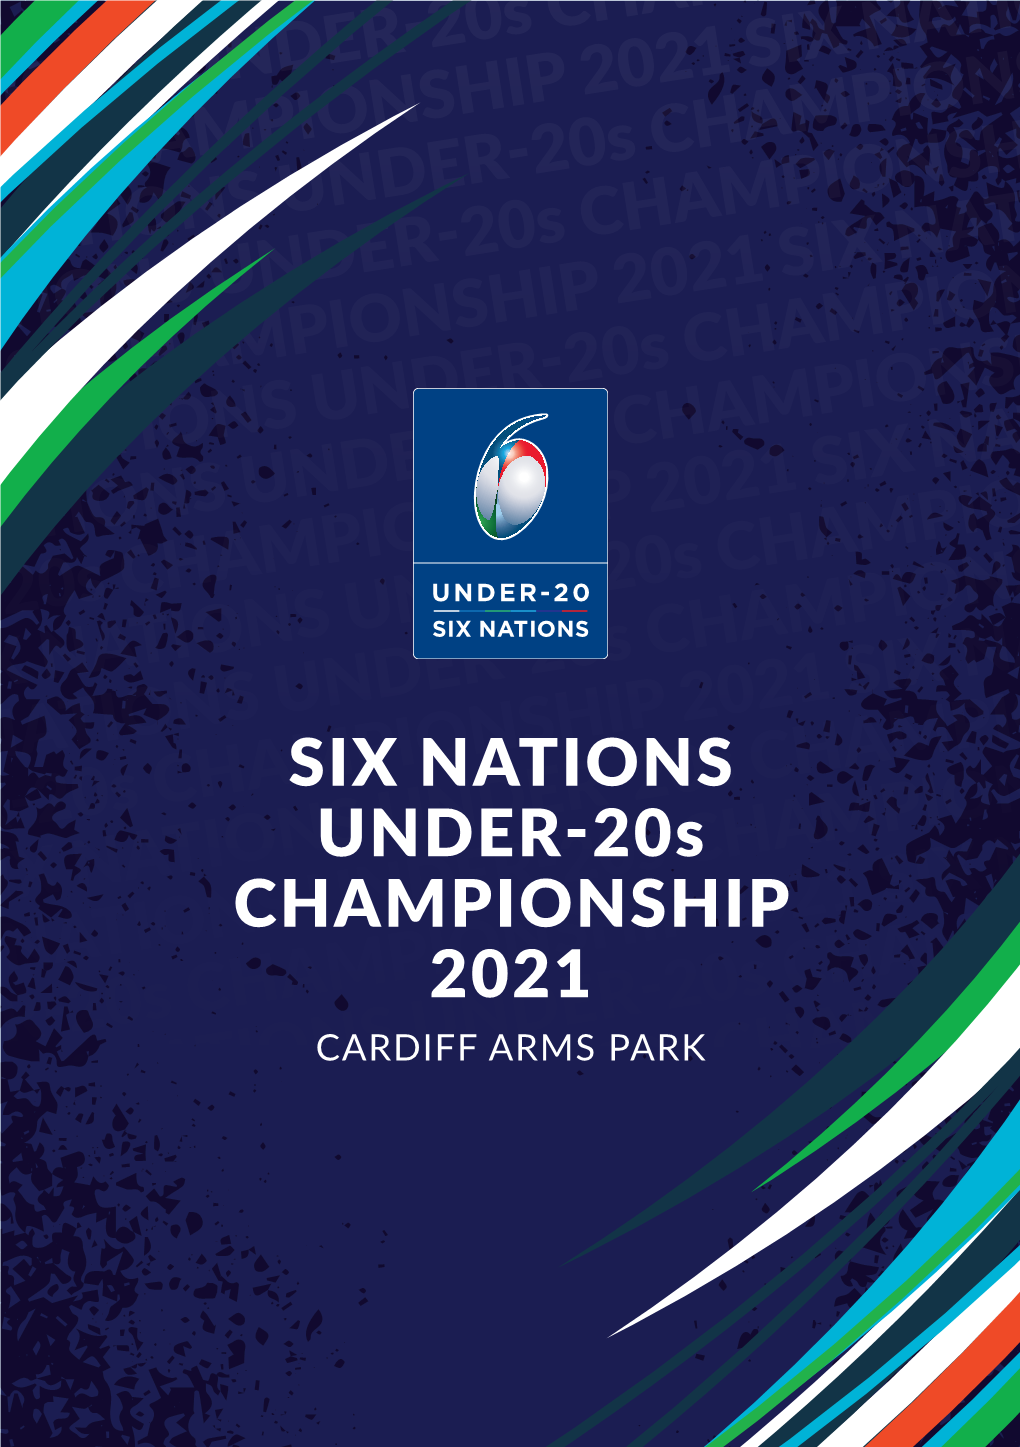 SIX NATIONS UNDER-20S CHAMPIONSHIP